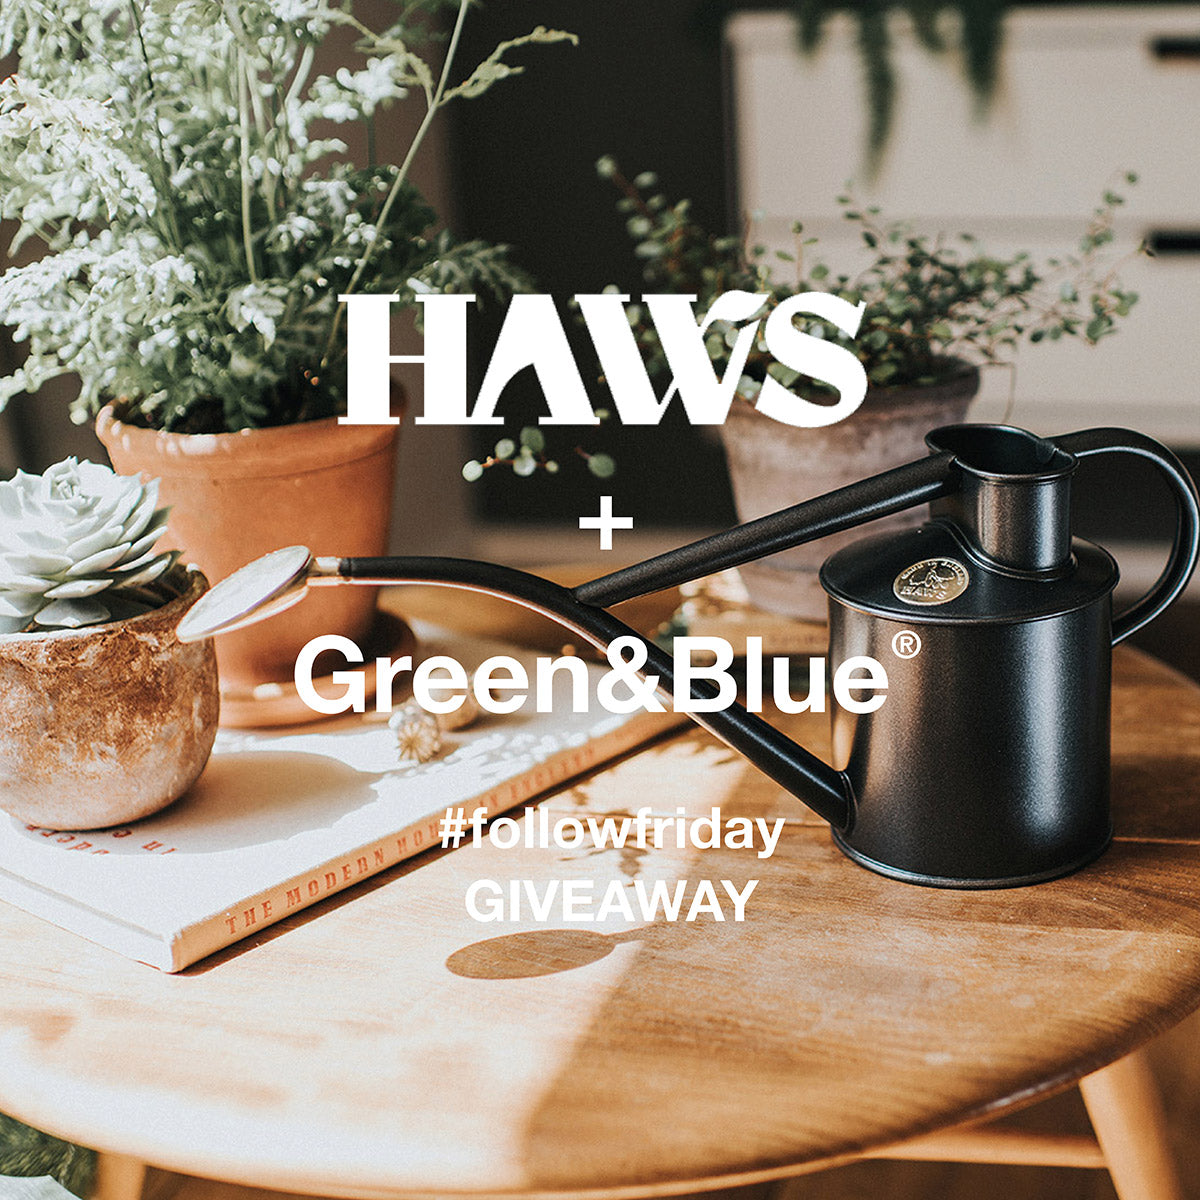 Haws follow friday competition